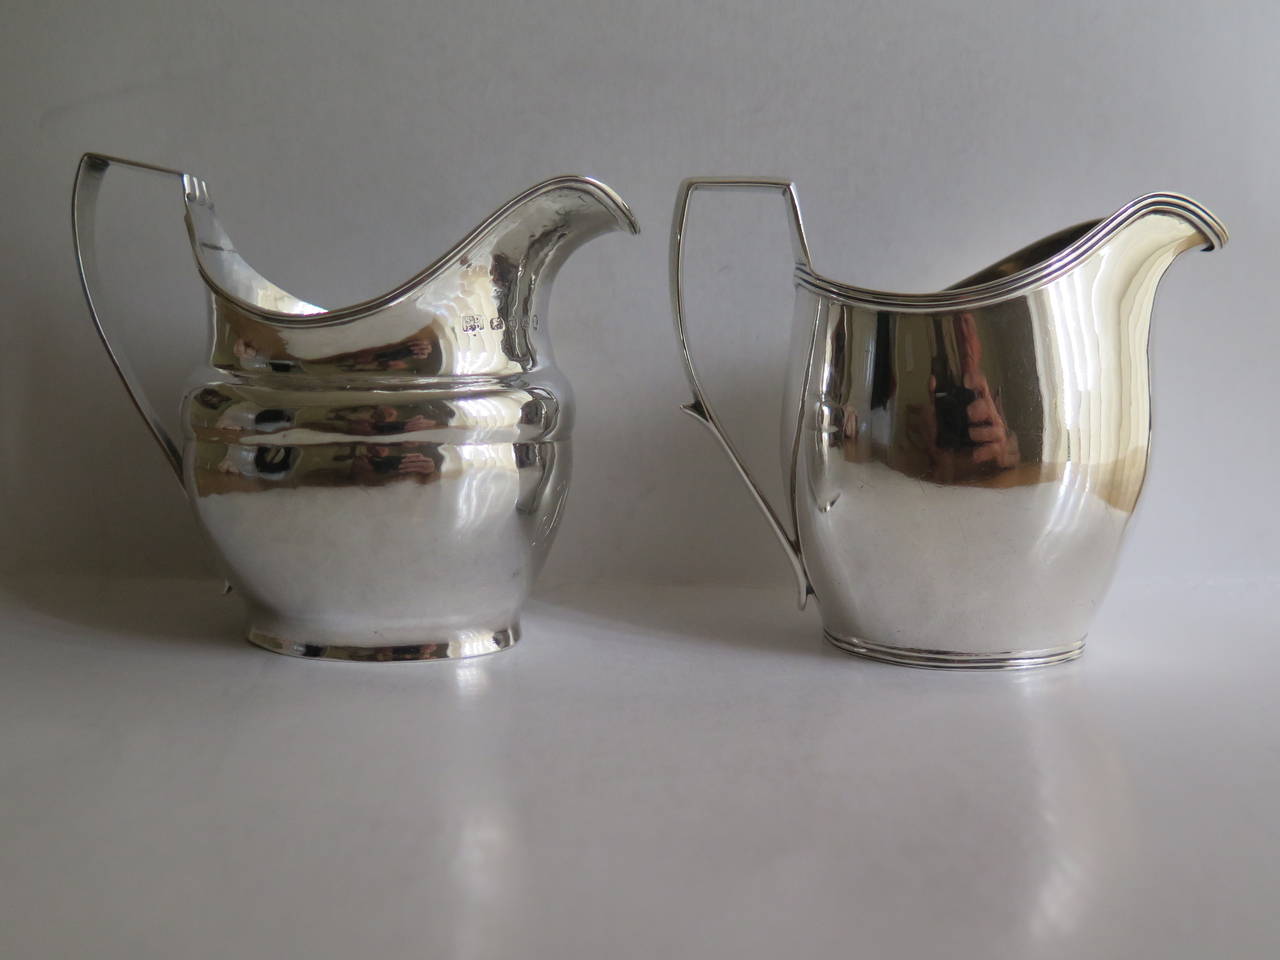 These are TWO different Sterling Silver, English, Cream Jugs from the George III period, very early in the 19th Century.

Both jugs are classic vase shaped with a high loop handle, reeded rim and are fully hall marked. They have a liquid volume of